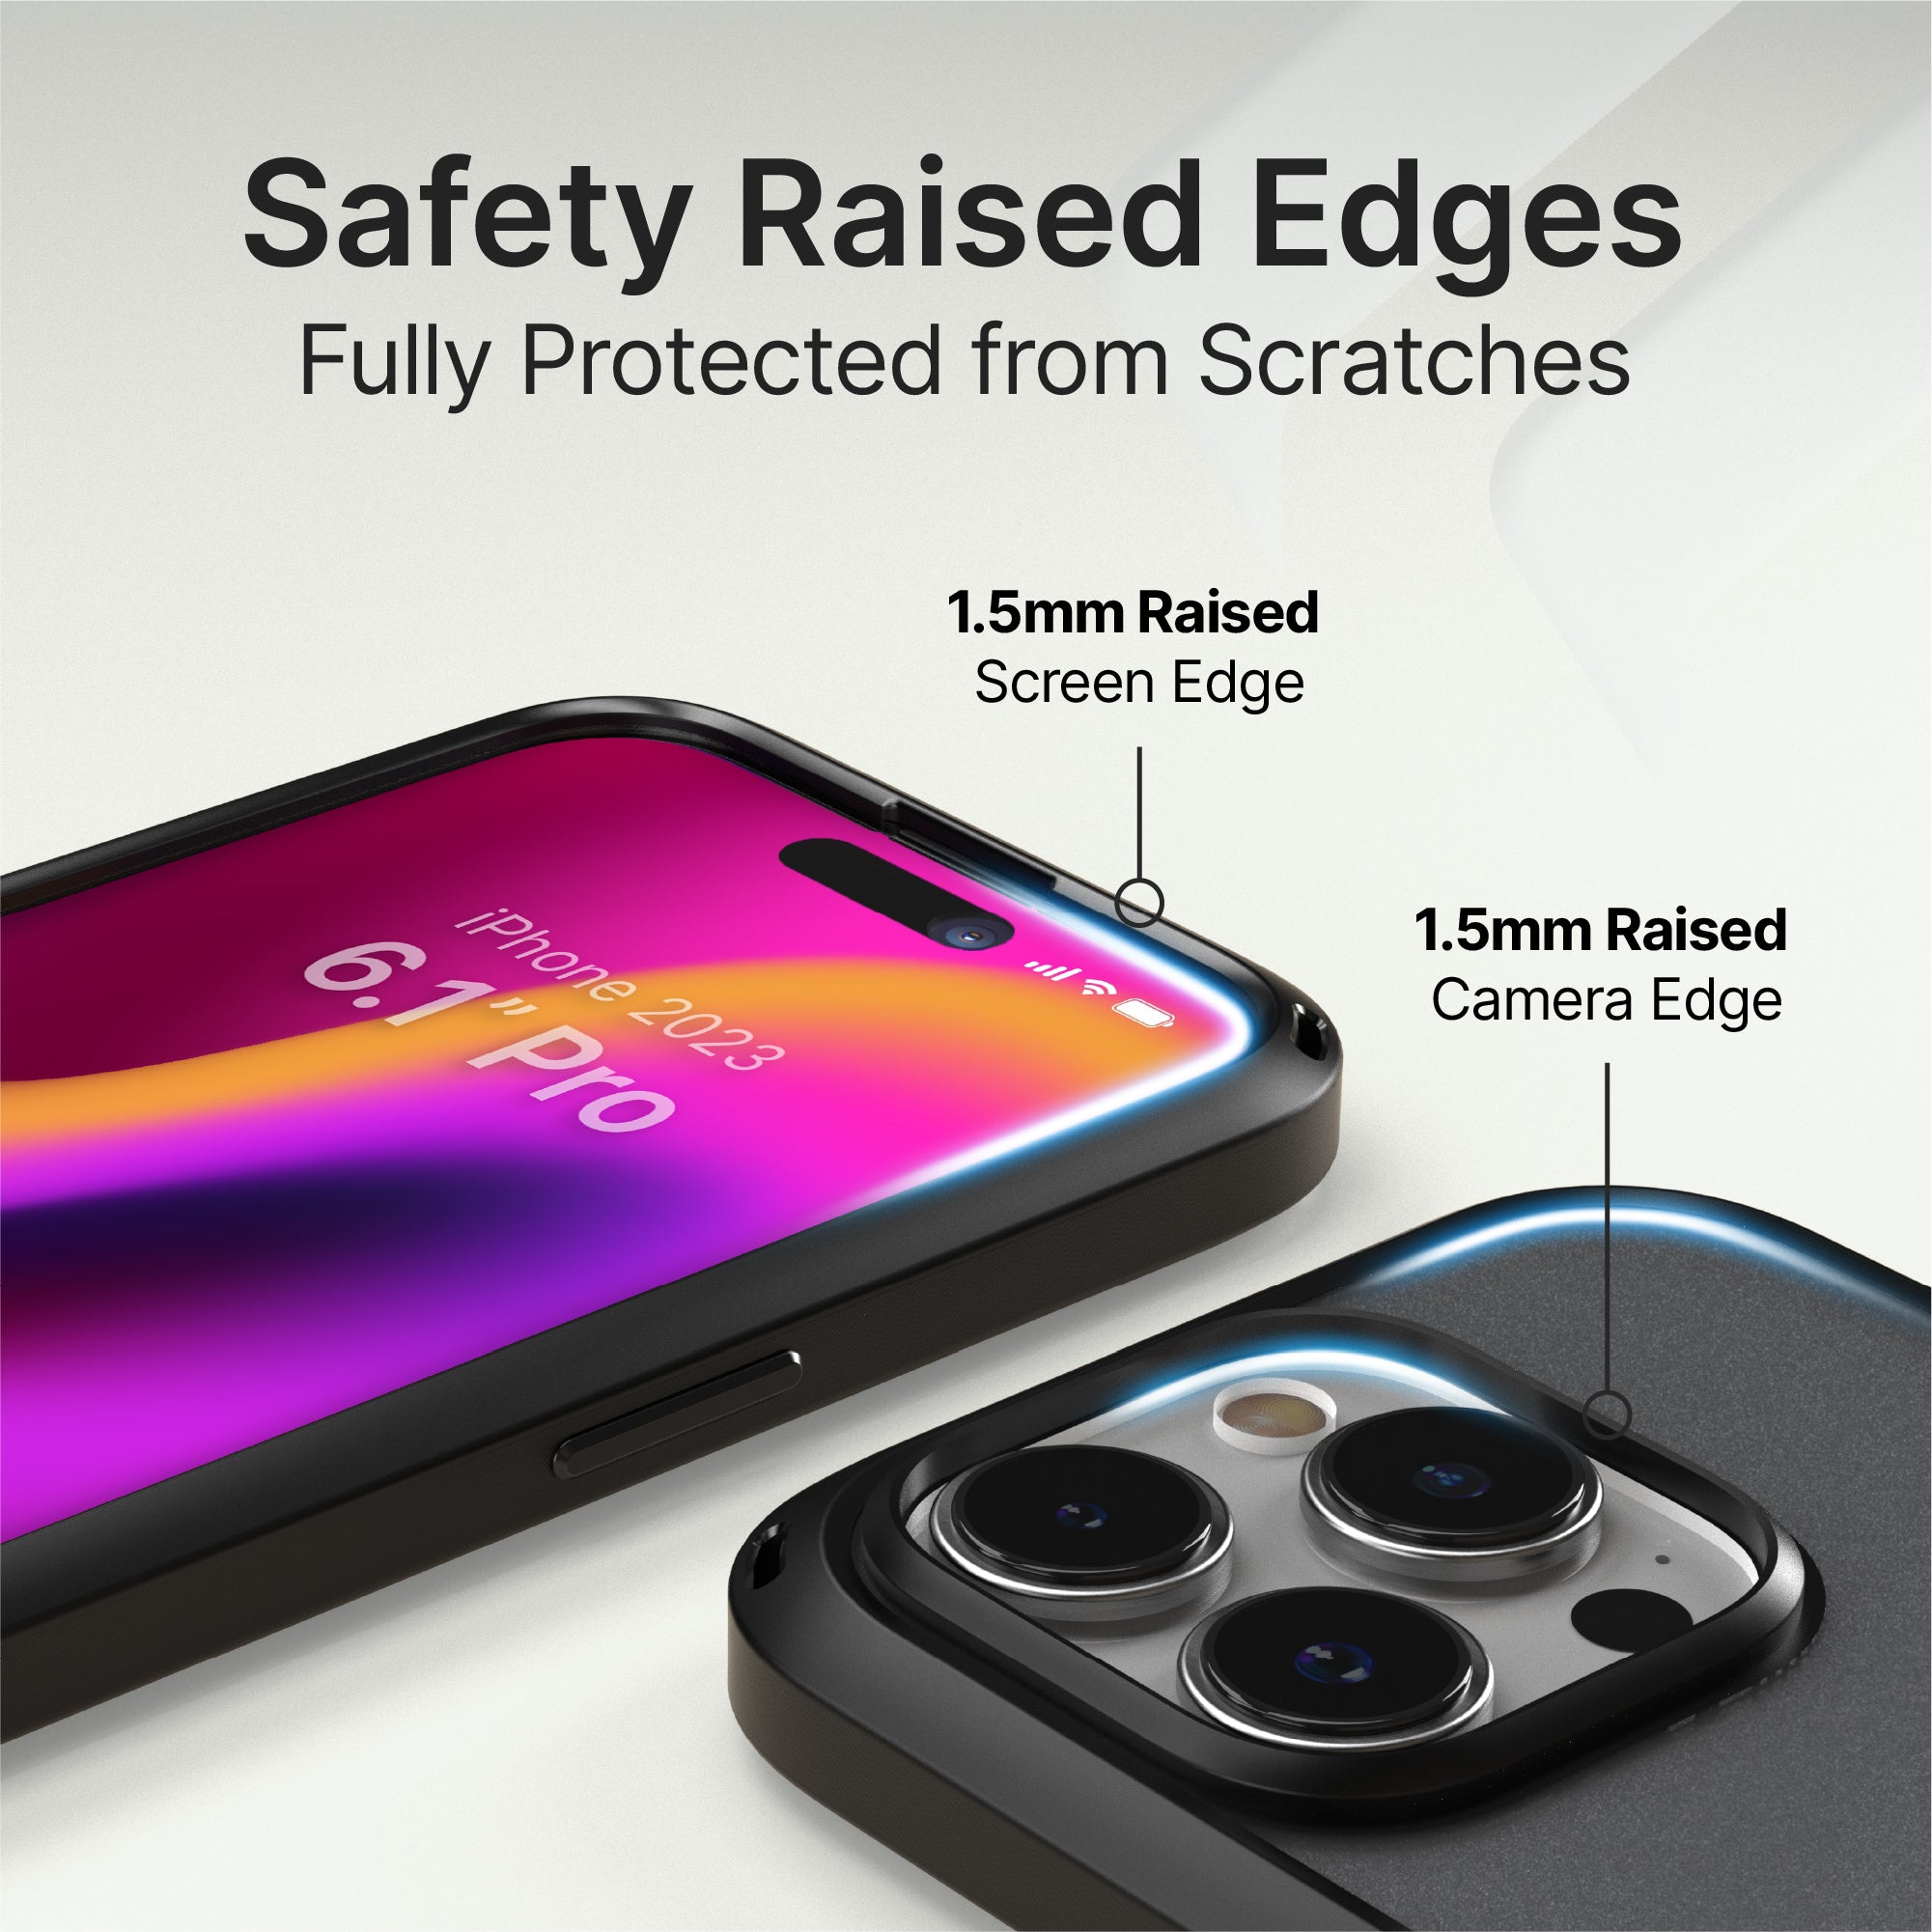 catalyst iphone 15 series influence case magsafe compatible stealth black for iphone 15 pro showing the safety raised edges for camera and screen text reads safety raised edges fully protected from scratches 1.5mm raised screen edge 1.5mm raised camera edge